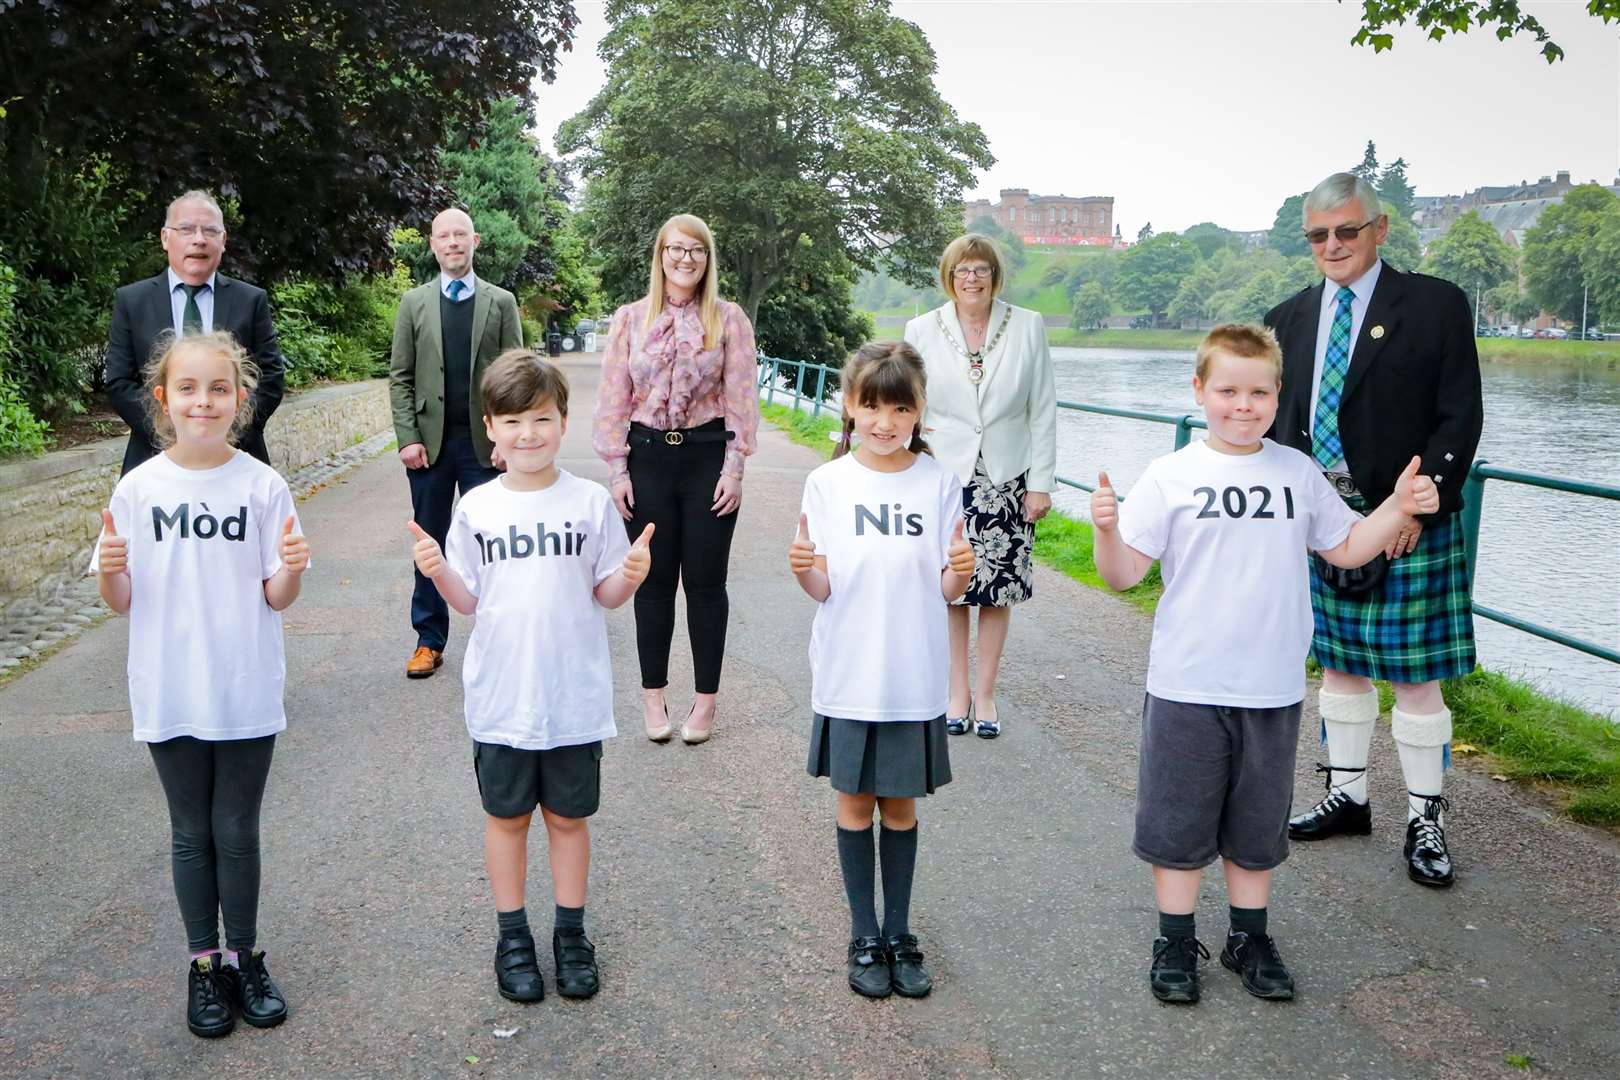 Mòd 2021 launches ahead of this year's festival in Inverness Picture shows Children from Inverness Gaelic School in front row L_R, Ava Williams -age 9 (Mòd) ,Ruaraidh MacLeod - age 6 (Inbhir), Isobel Simpson - age 8 (Nis) ,Hunter Williams - age 8 (2021), back row L-R, Norrie Mackay - Vice Convener of the Local Organising Committee, Councillor Calum Munro (Chair of the Gaelic Committee) ,Mairi Macdonald - Local Organising Committee , Depute Provost Councillor McAllister, Allan Campbell - President of An Comunn Gaidhealach celebrating the launch of Mòd 2021 on the banks of the River Ness 2 September 2021